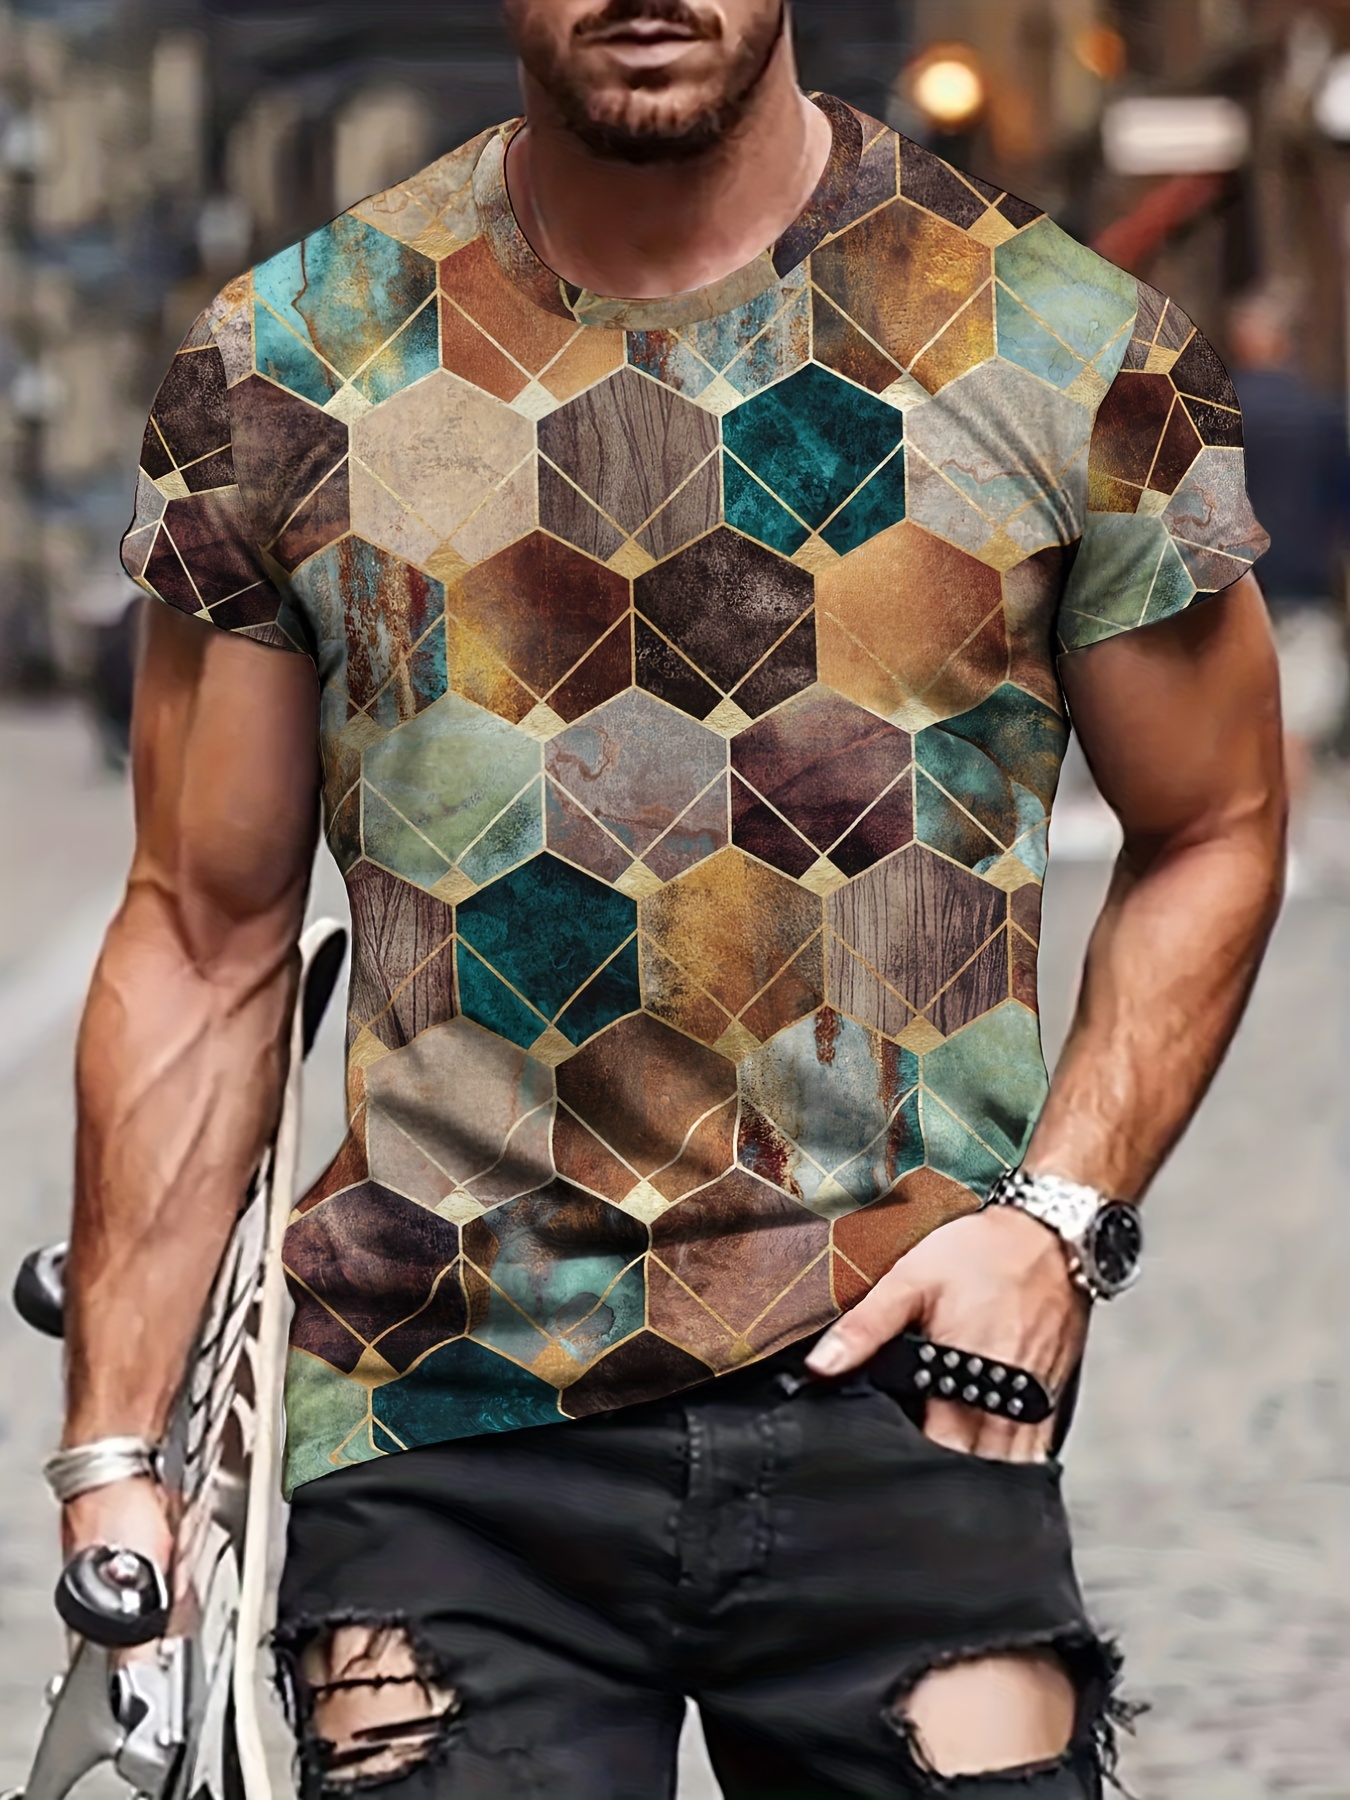 All Over Colorful Print Men's T-shirt For Summer, Casual Stretch